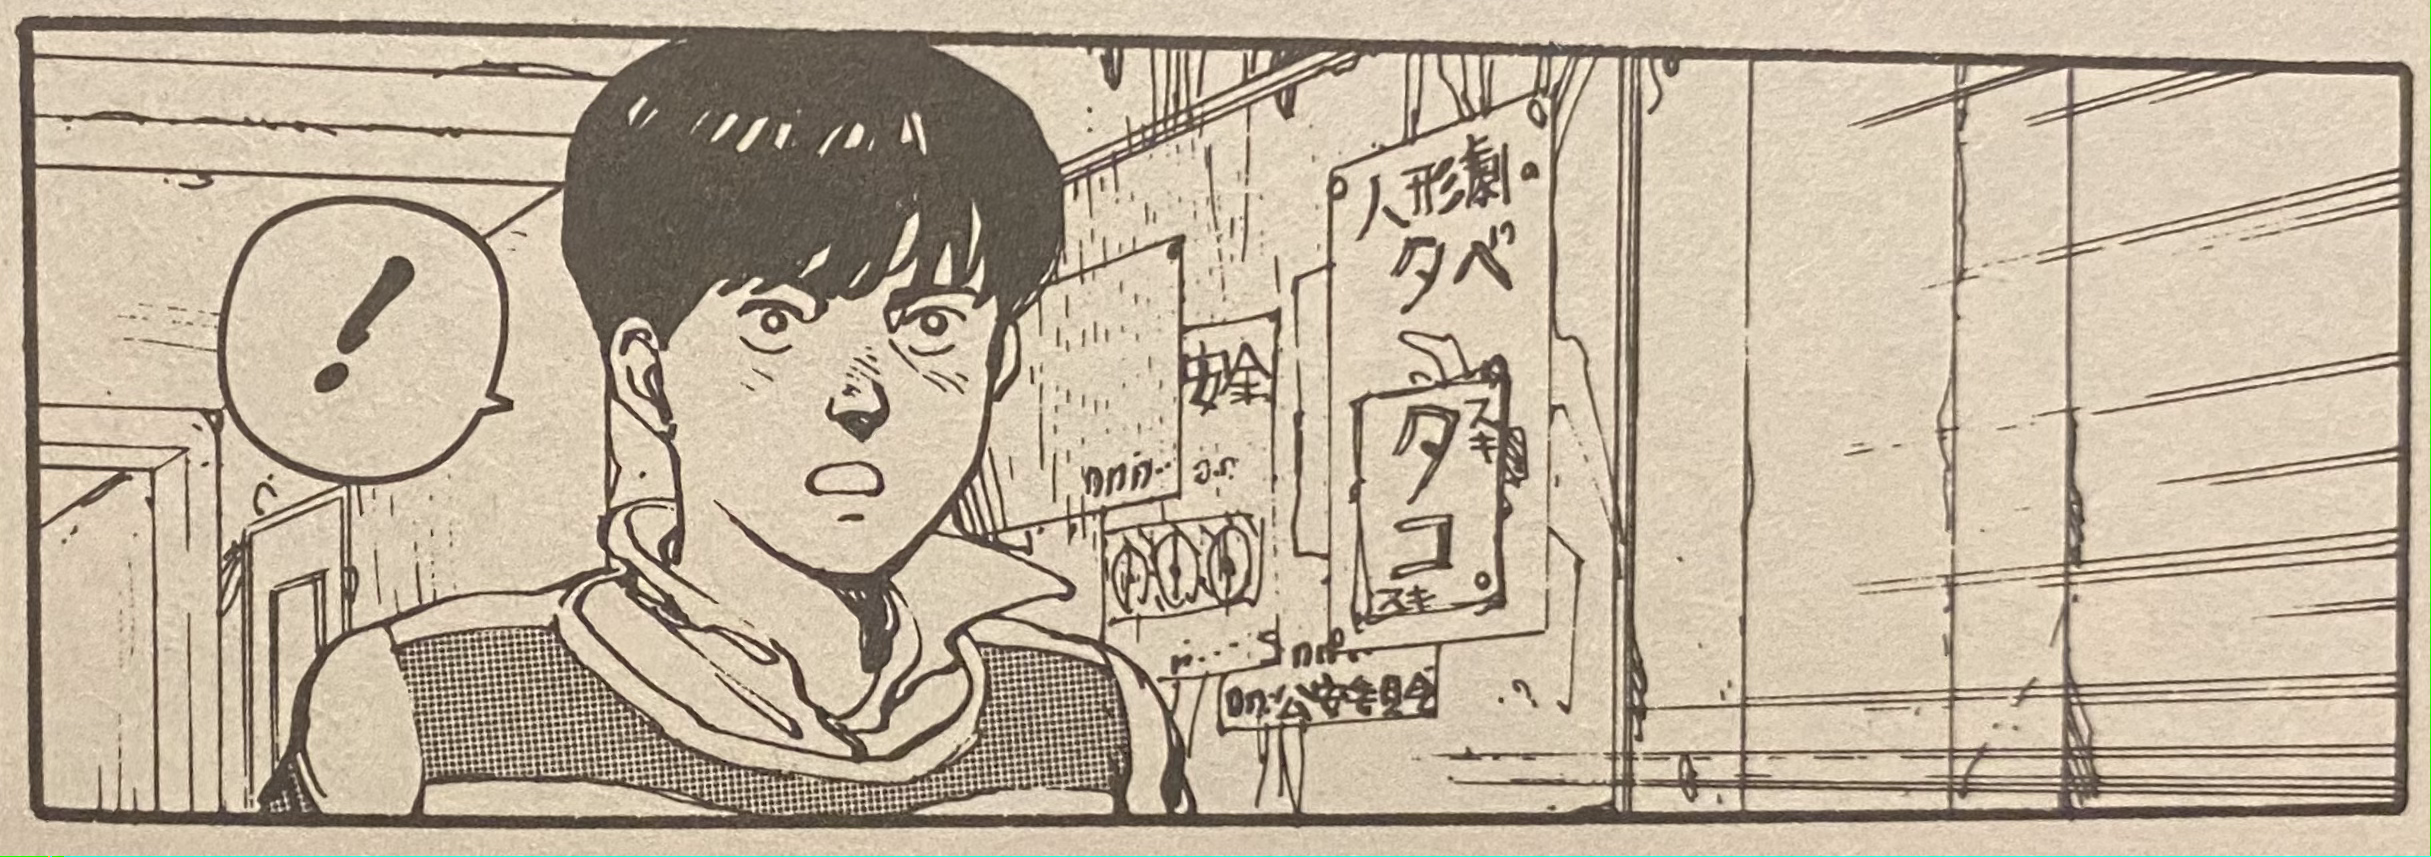 my favorite panel from akira book one! if you follow me on tumblr you might recognise this as my profile pic :) <br><br> [image id: a panel from the akira manga, showing kaneda standing in a hallway. there is a speech bubble saying '!' and he has a suprised look on his face. there are posters hanging on the wall behind him. /end id]